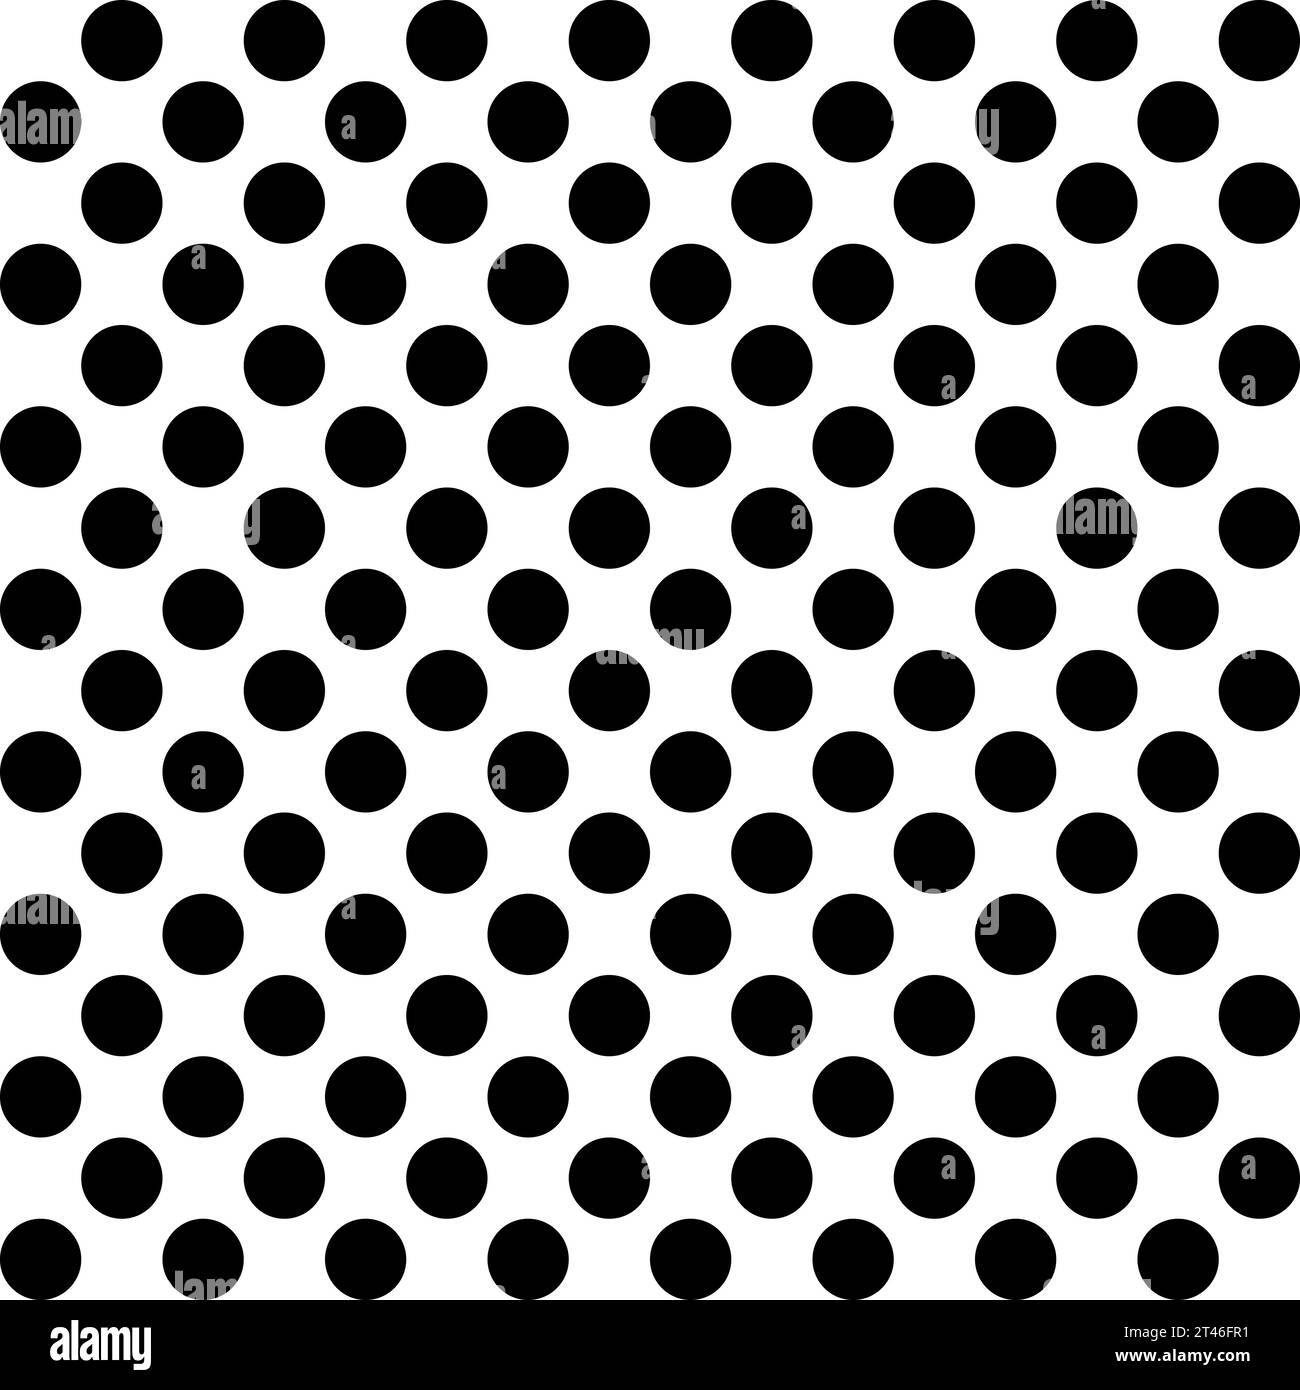 Polka dot pattern, black round dots on white background - dotted seamless repeatable texture background Stock Vector